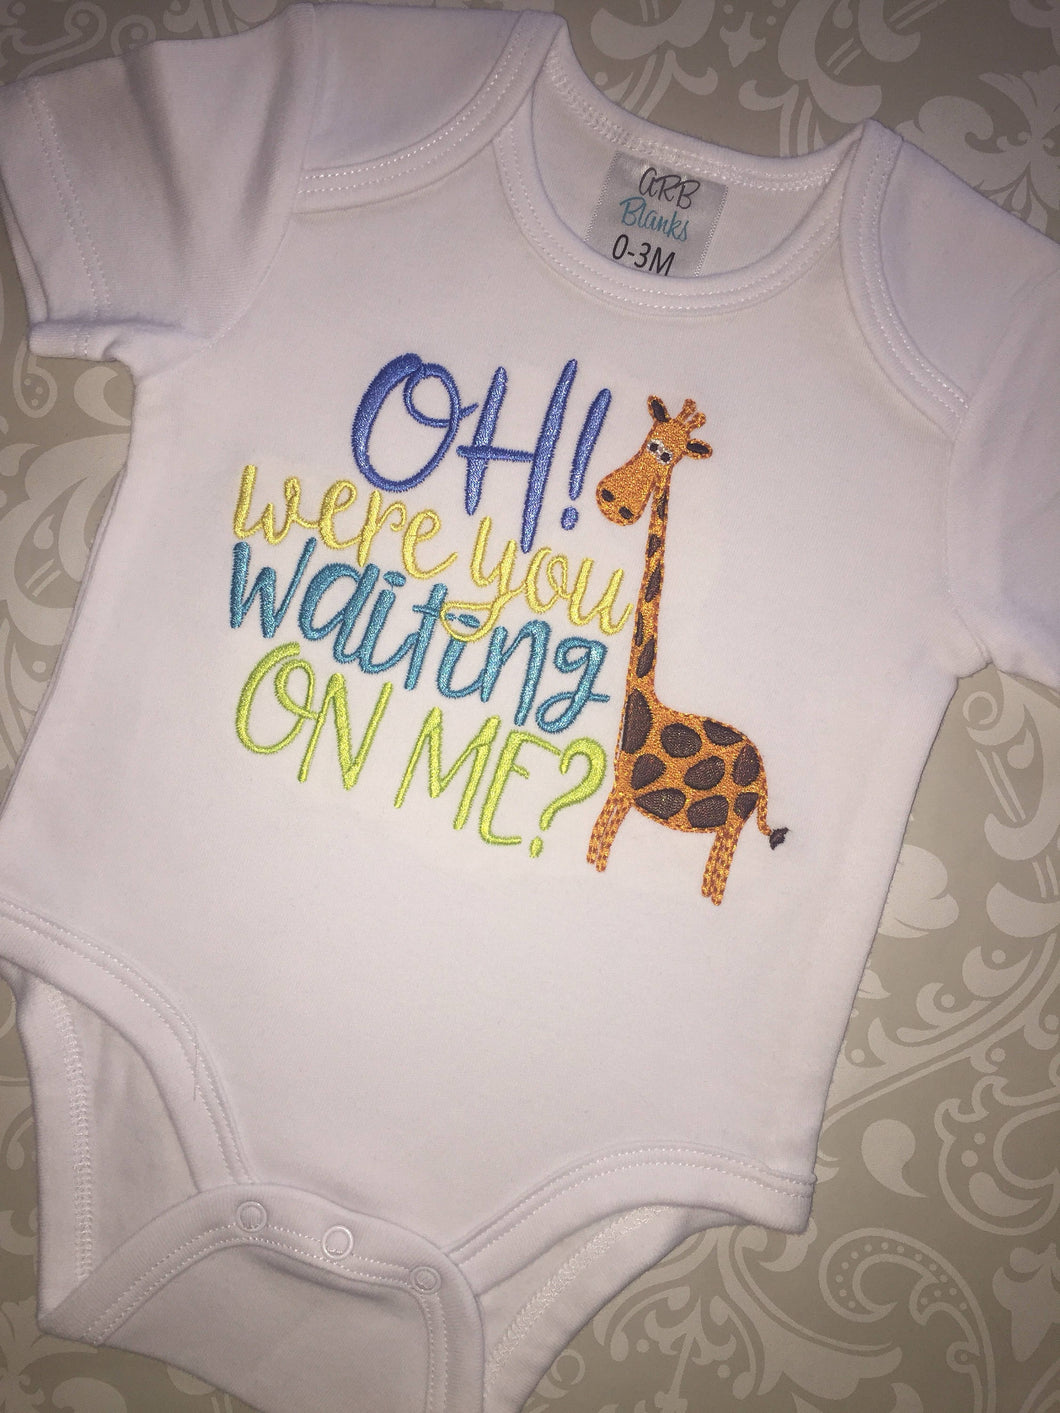 You were waiting on me? with Giraffe embroidered baby bodysuit